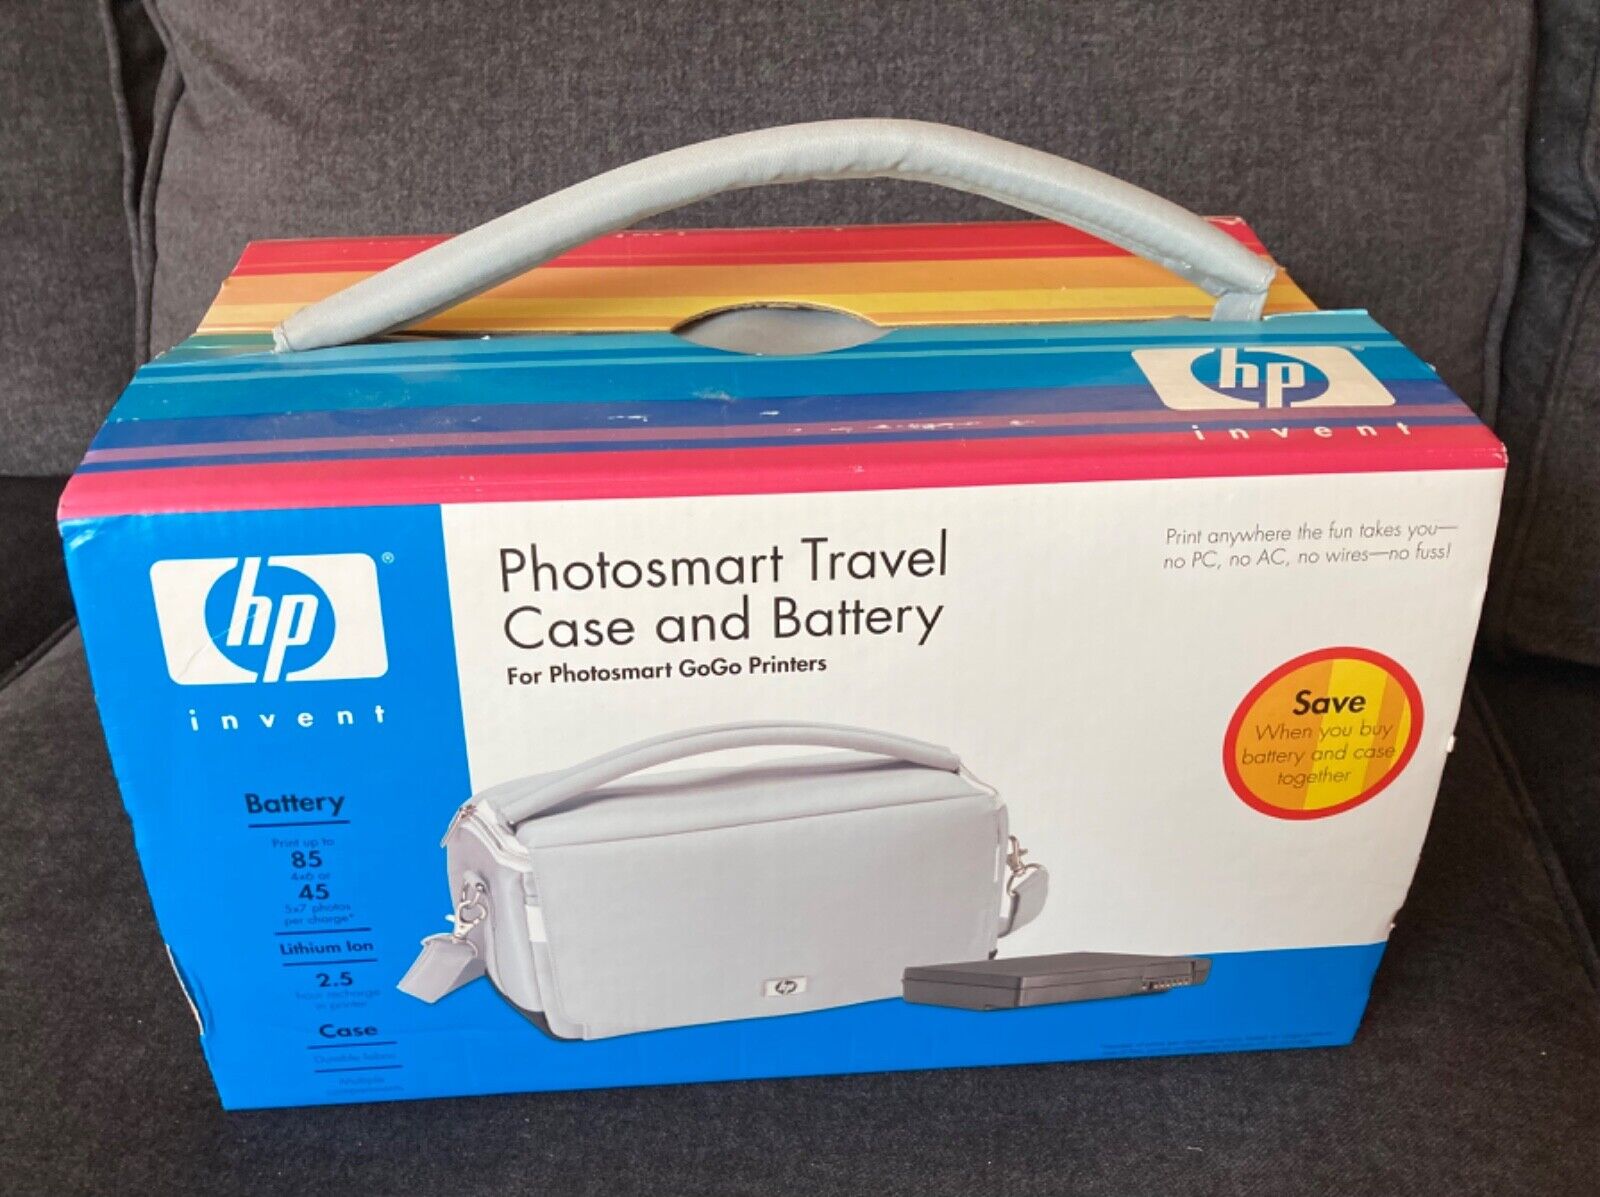 HP Photosmart Travel Case and Battery NEW in Box